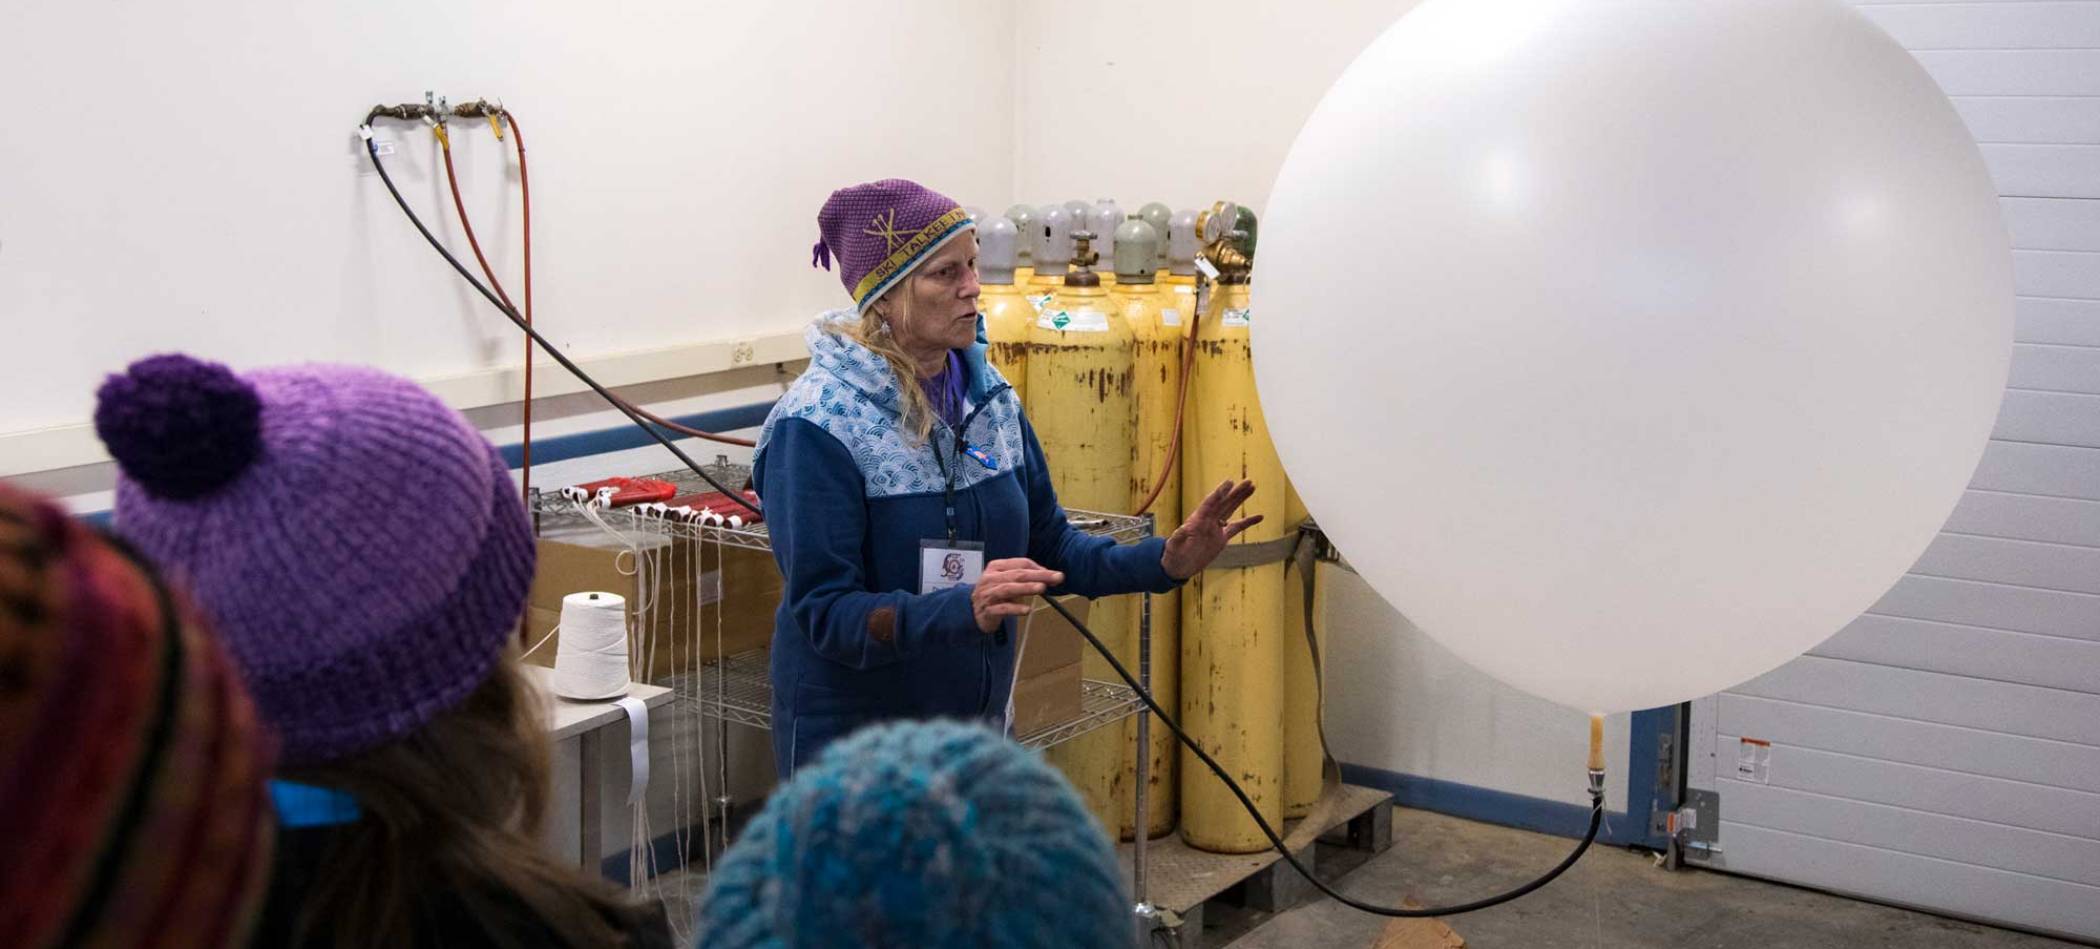 A researcher with a large balloon connected to a hose addresses a crowd